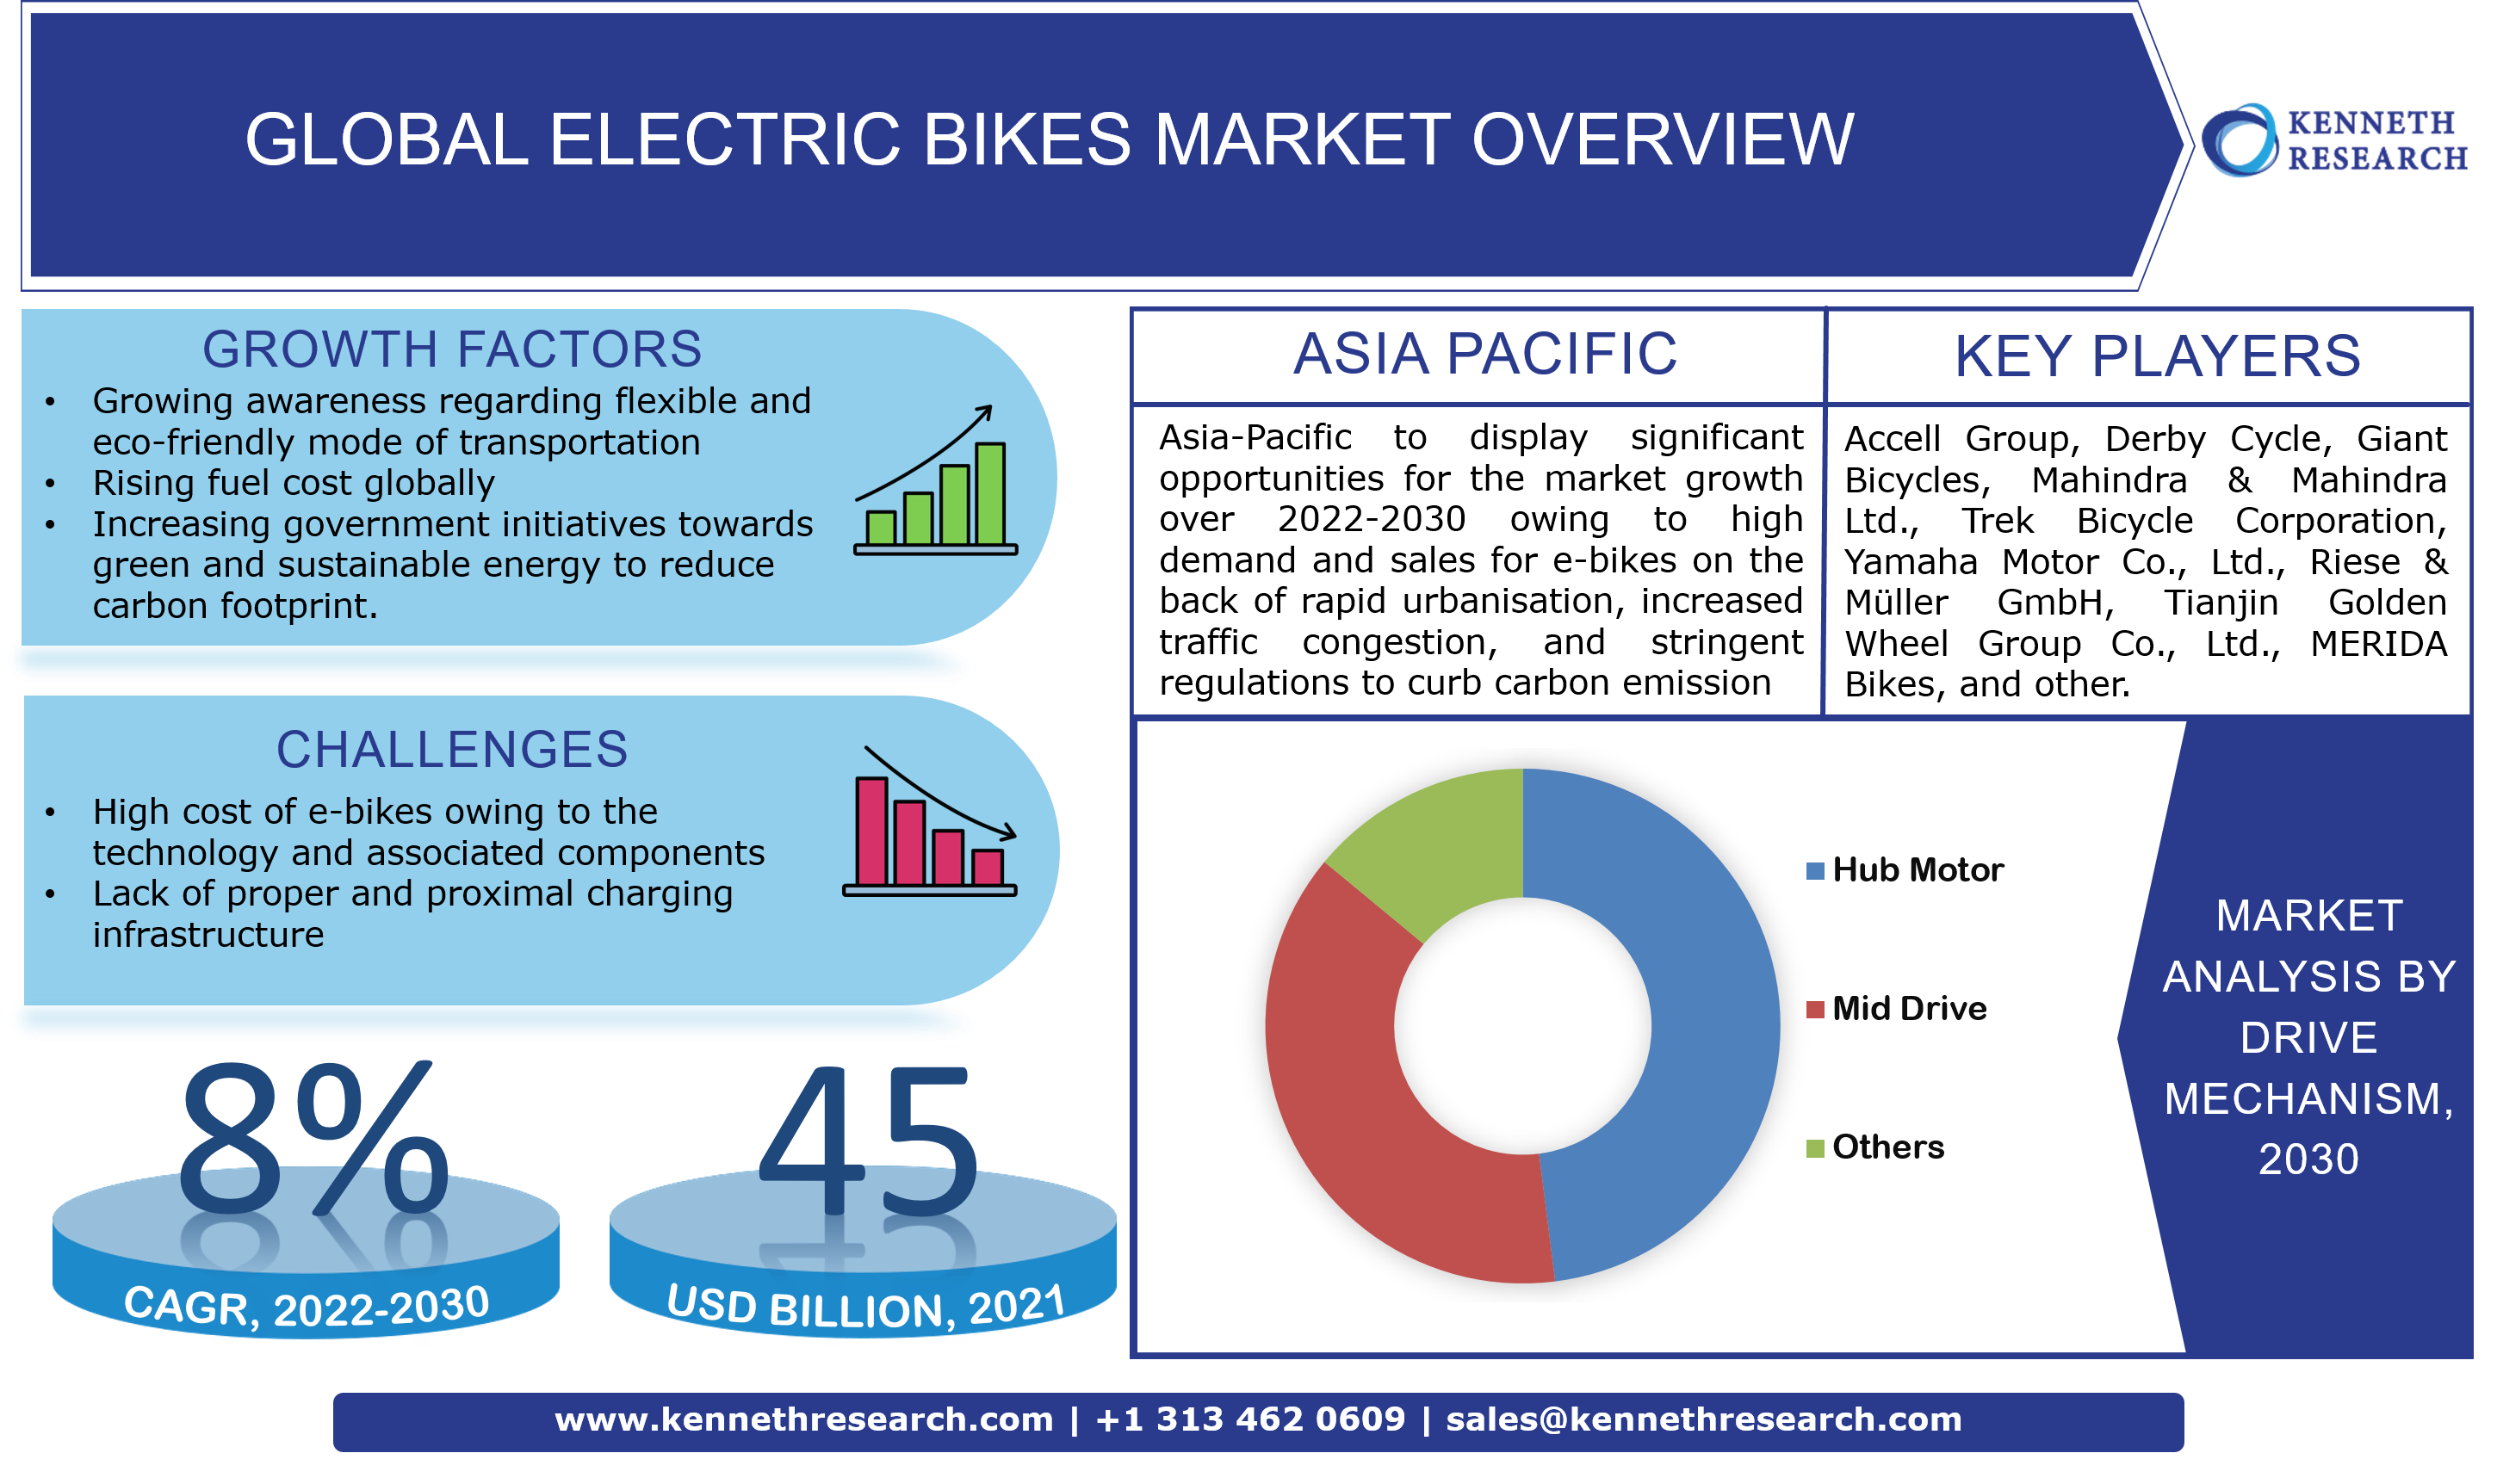 https://www.kennethresearch.com/backend/report_image/Global%20Electric%20Bikes%20Market%20-%20Overview.PNG